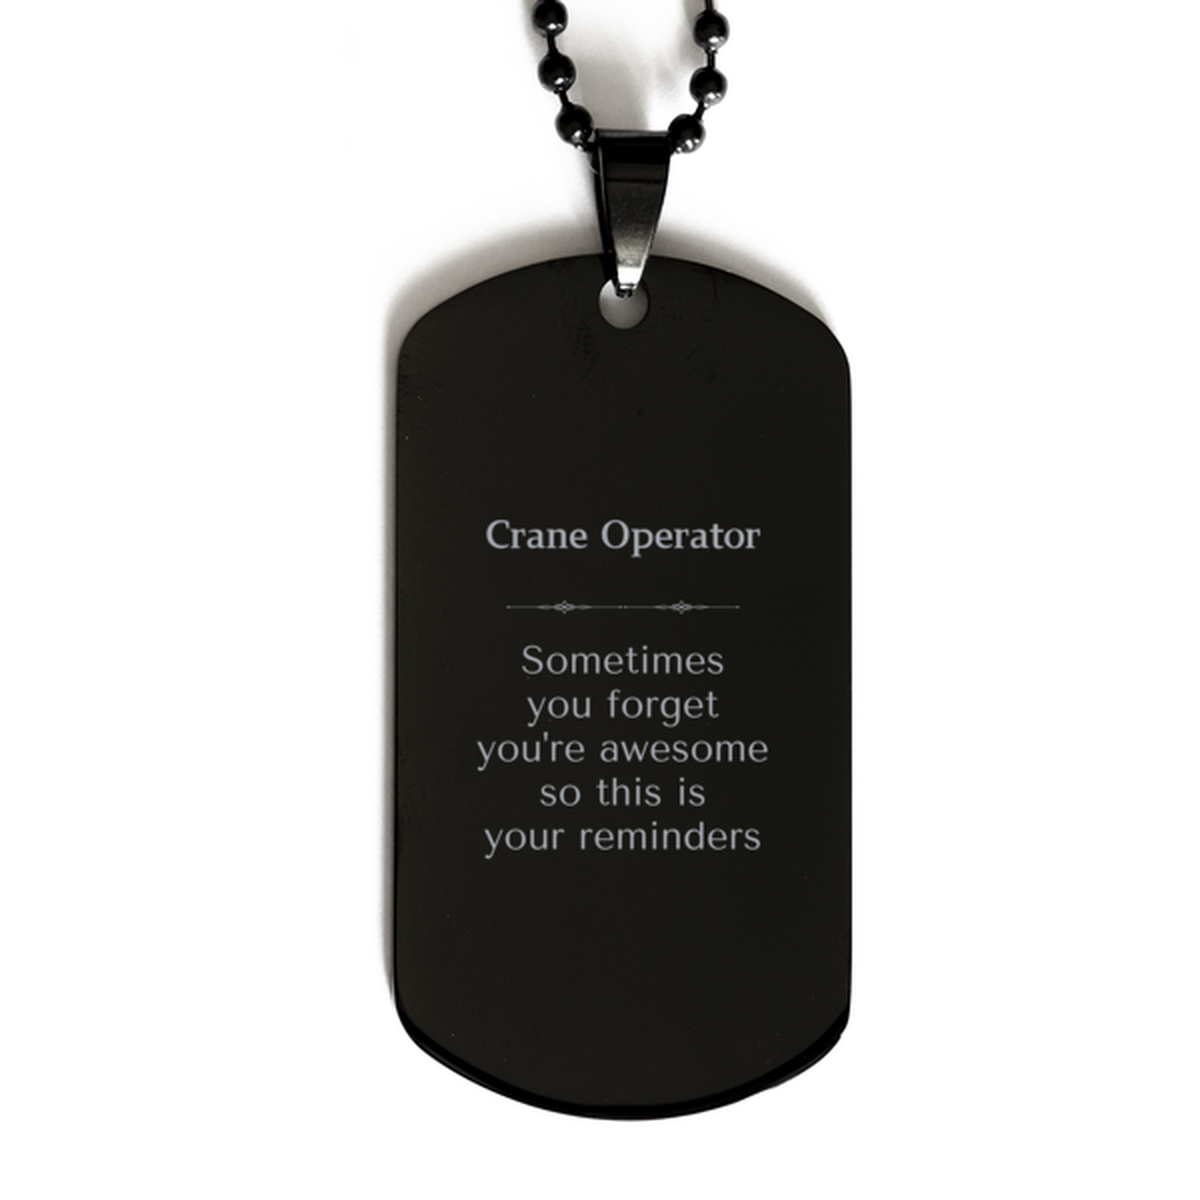 Sentimental Crane Operator Black Dog Tag, Crane Operator Sometimes you forget you're awesome so this is your reminders, Graduation Christmas Birthday Gifts for Crane Operator, Men, Women, Coworkers